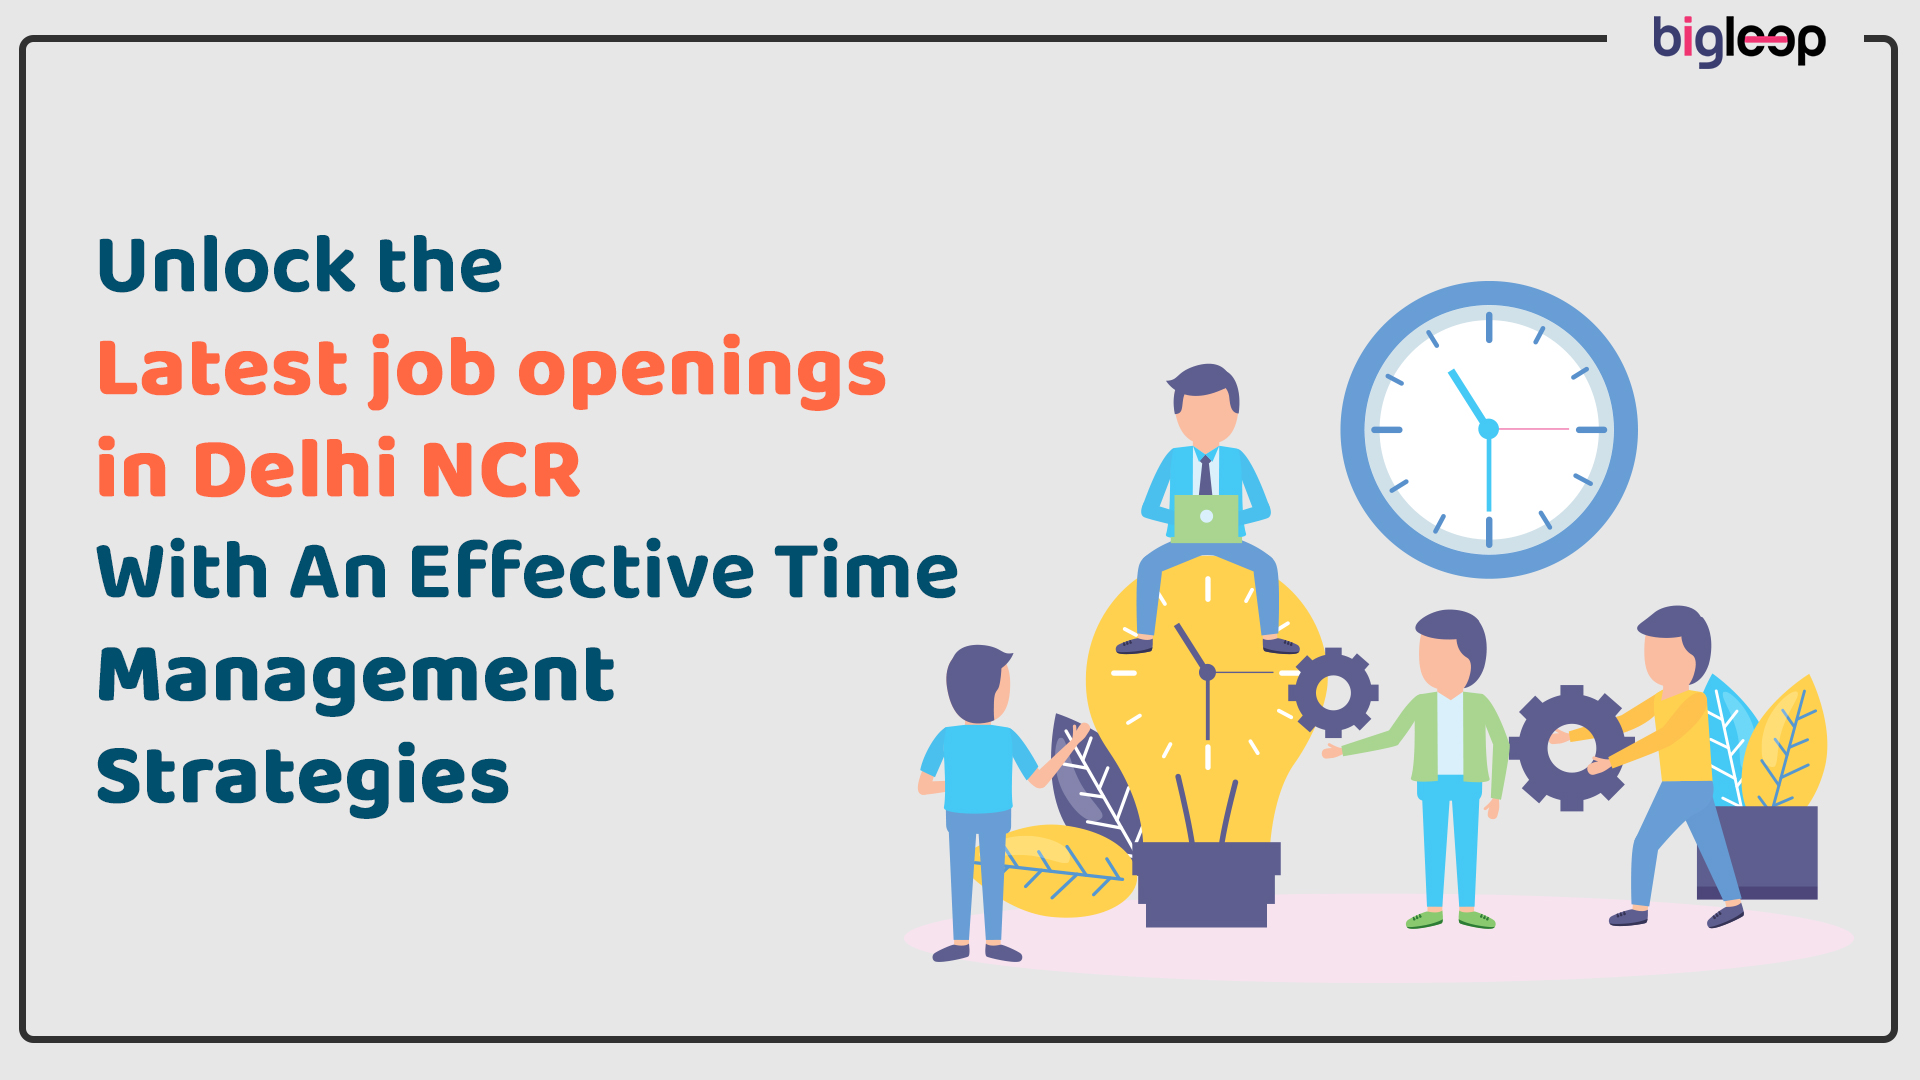 Unlock the latest job openings in Delhi NCR With An Effective Time Management Strategies 